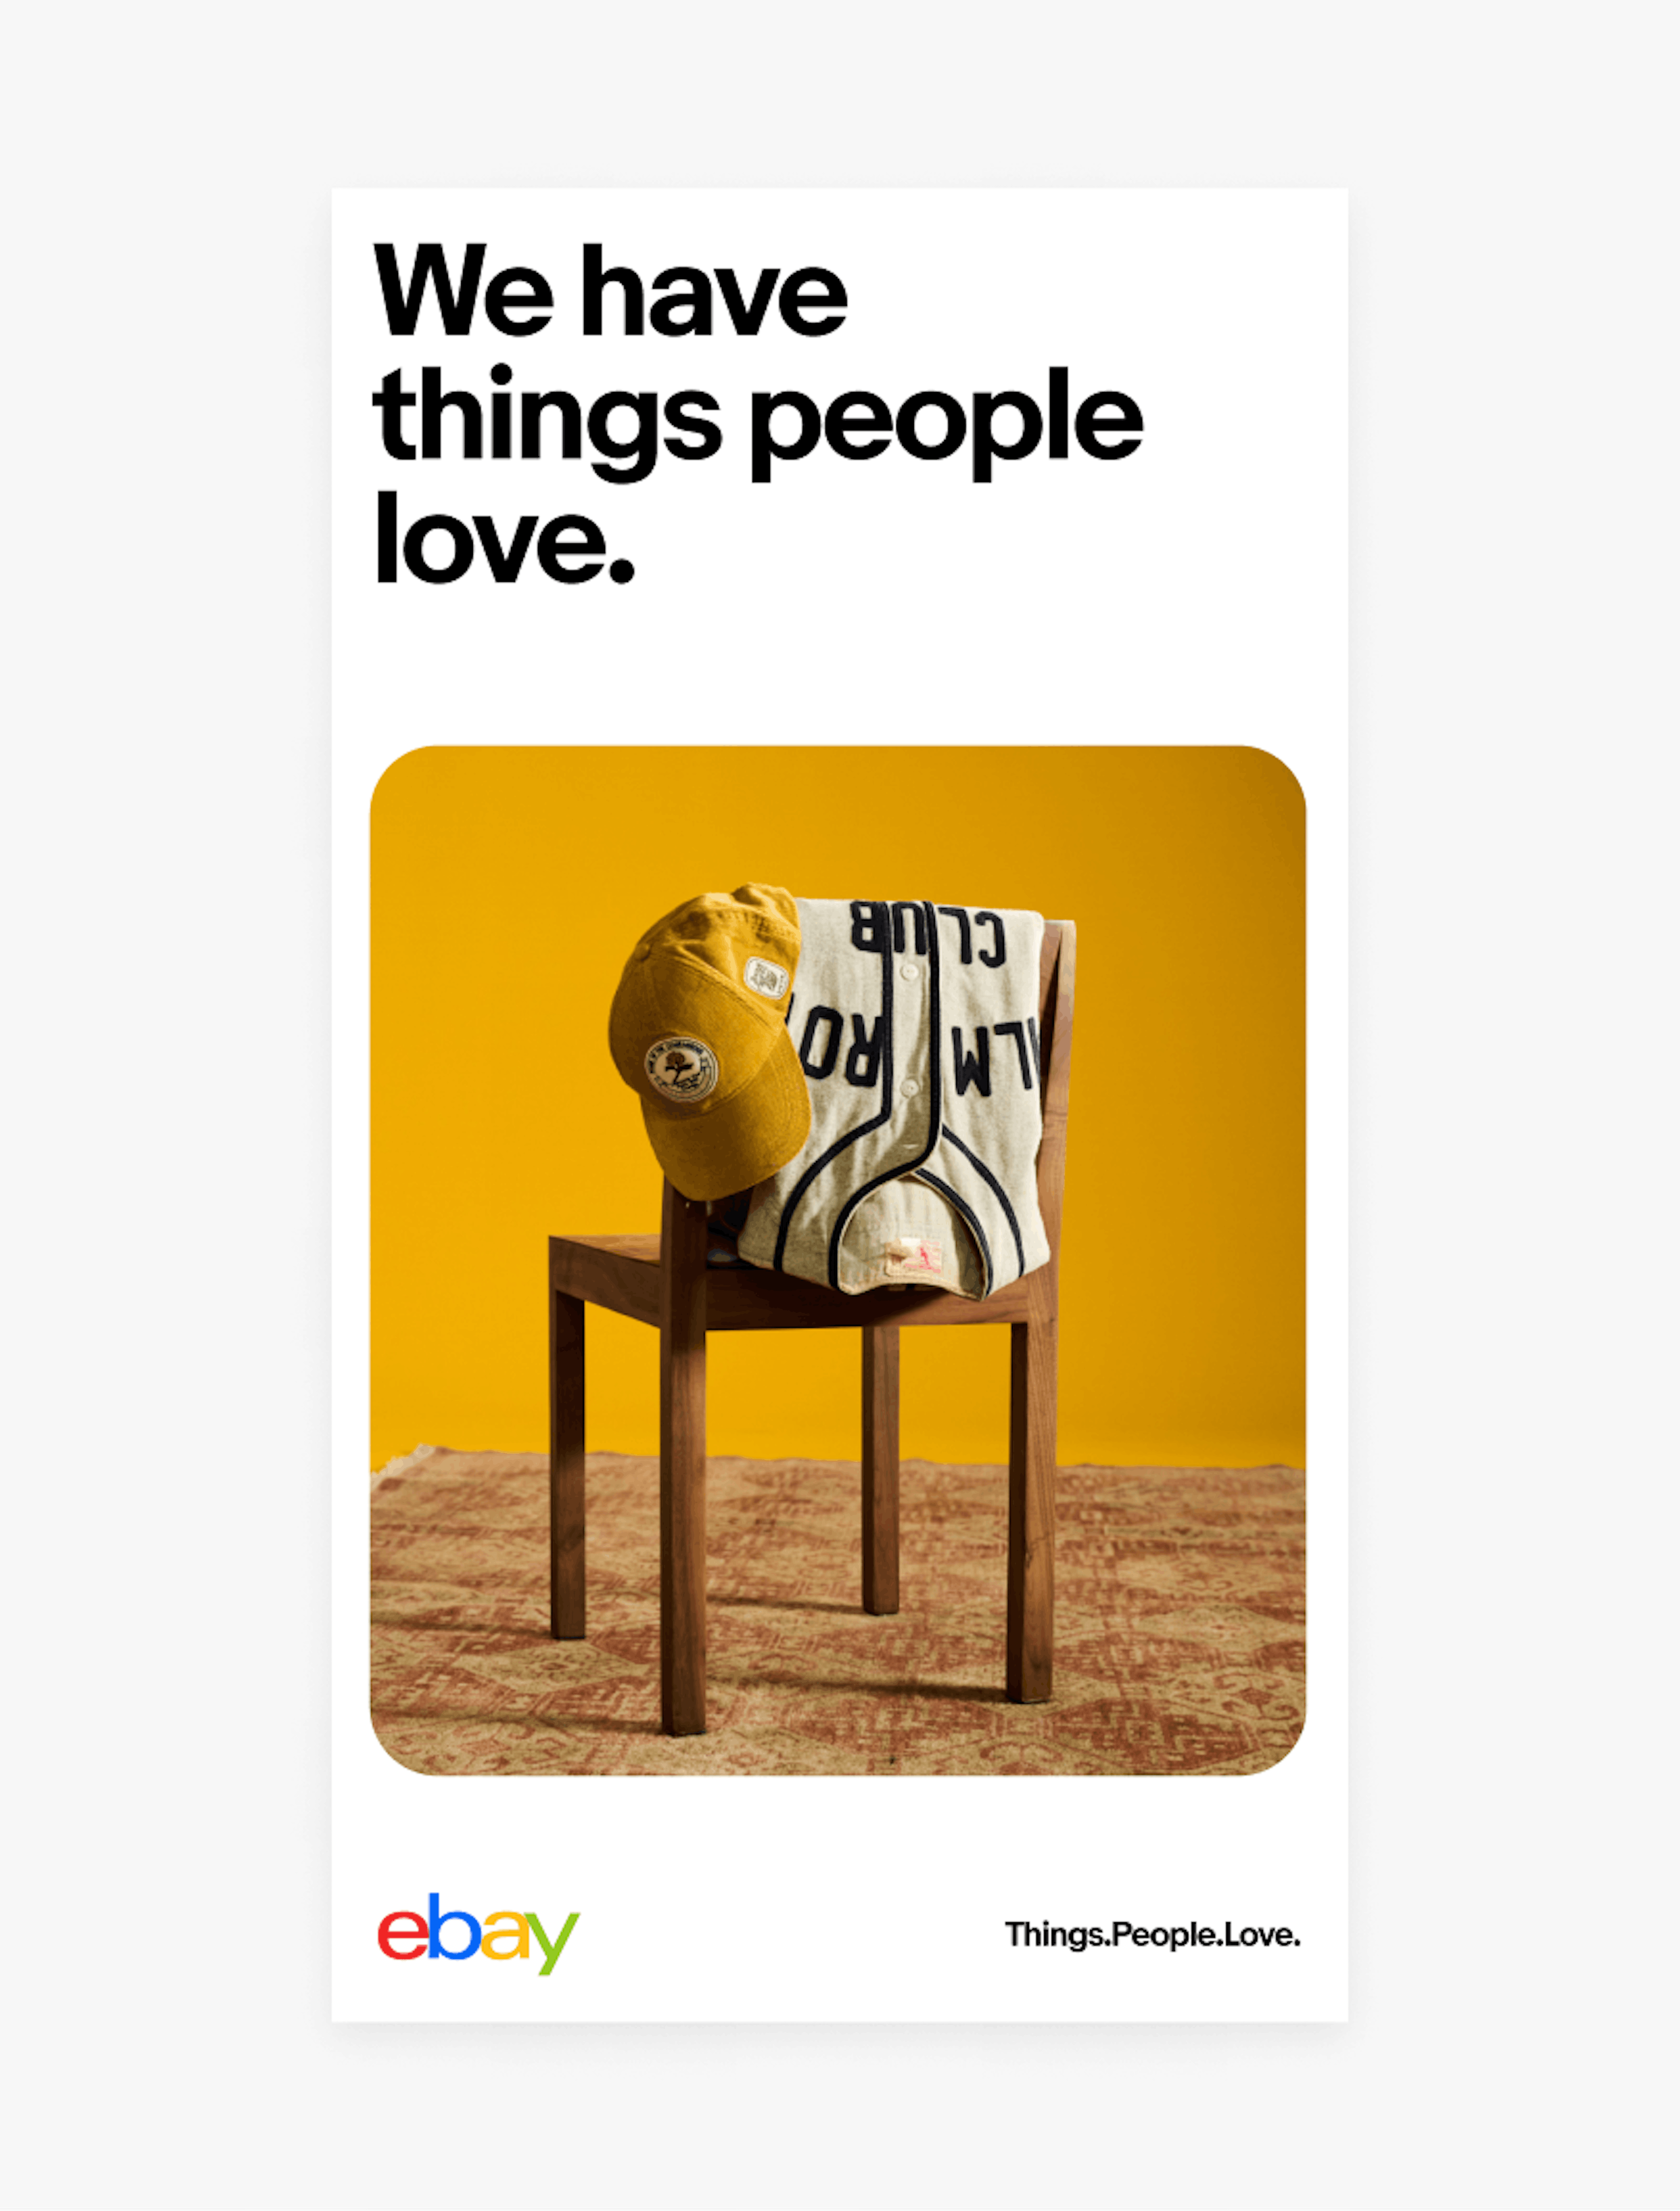 A vertical white layout with a headline of “We have things people love.” A vibrant yellow image sits in the middle of a chair with a white jersey and yellow hat. The eBay logo is in the bottom left and “Things.People.Love.” is in the bottom right.